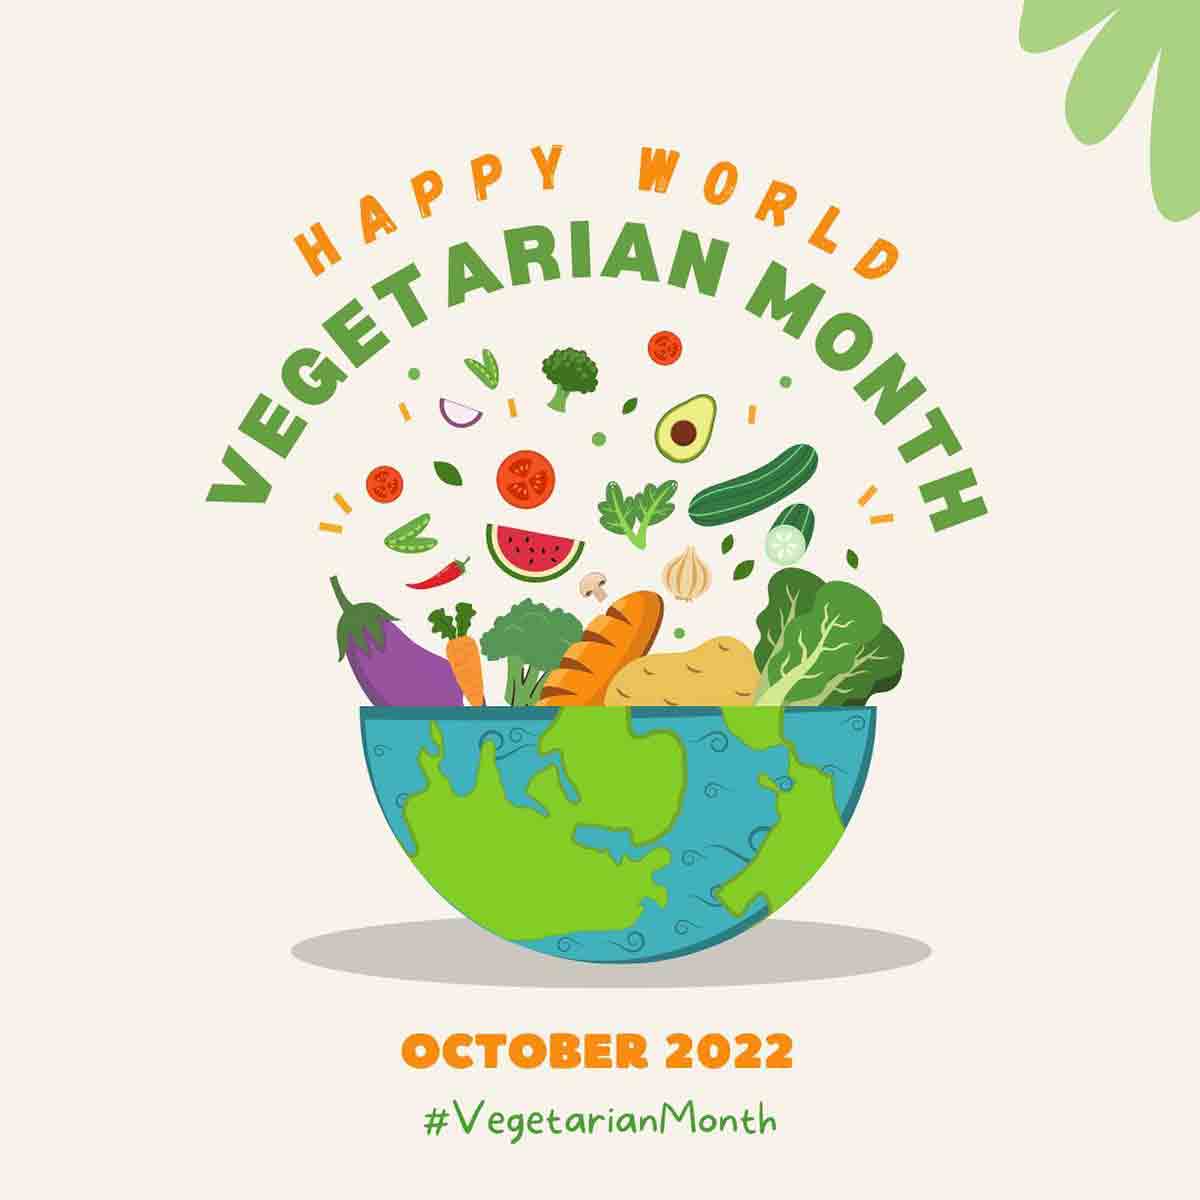 sifcare vegetarian month poster 2022